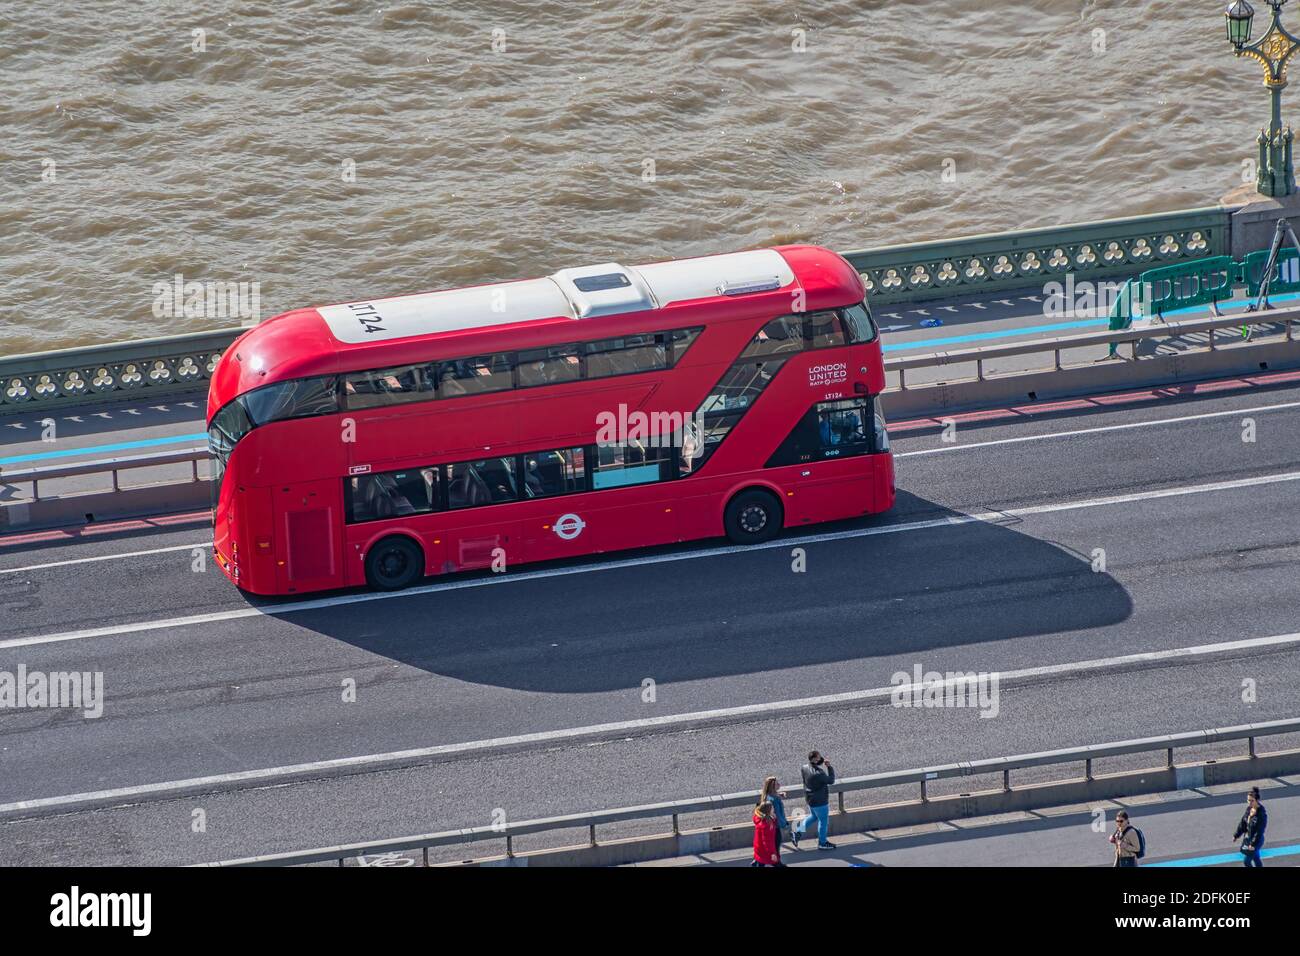 LONDON, UNITED KINGDOM - SEPTEMBER 28th 2020: Aerial view of a new Routemaster red London bus Stock Photo